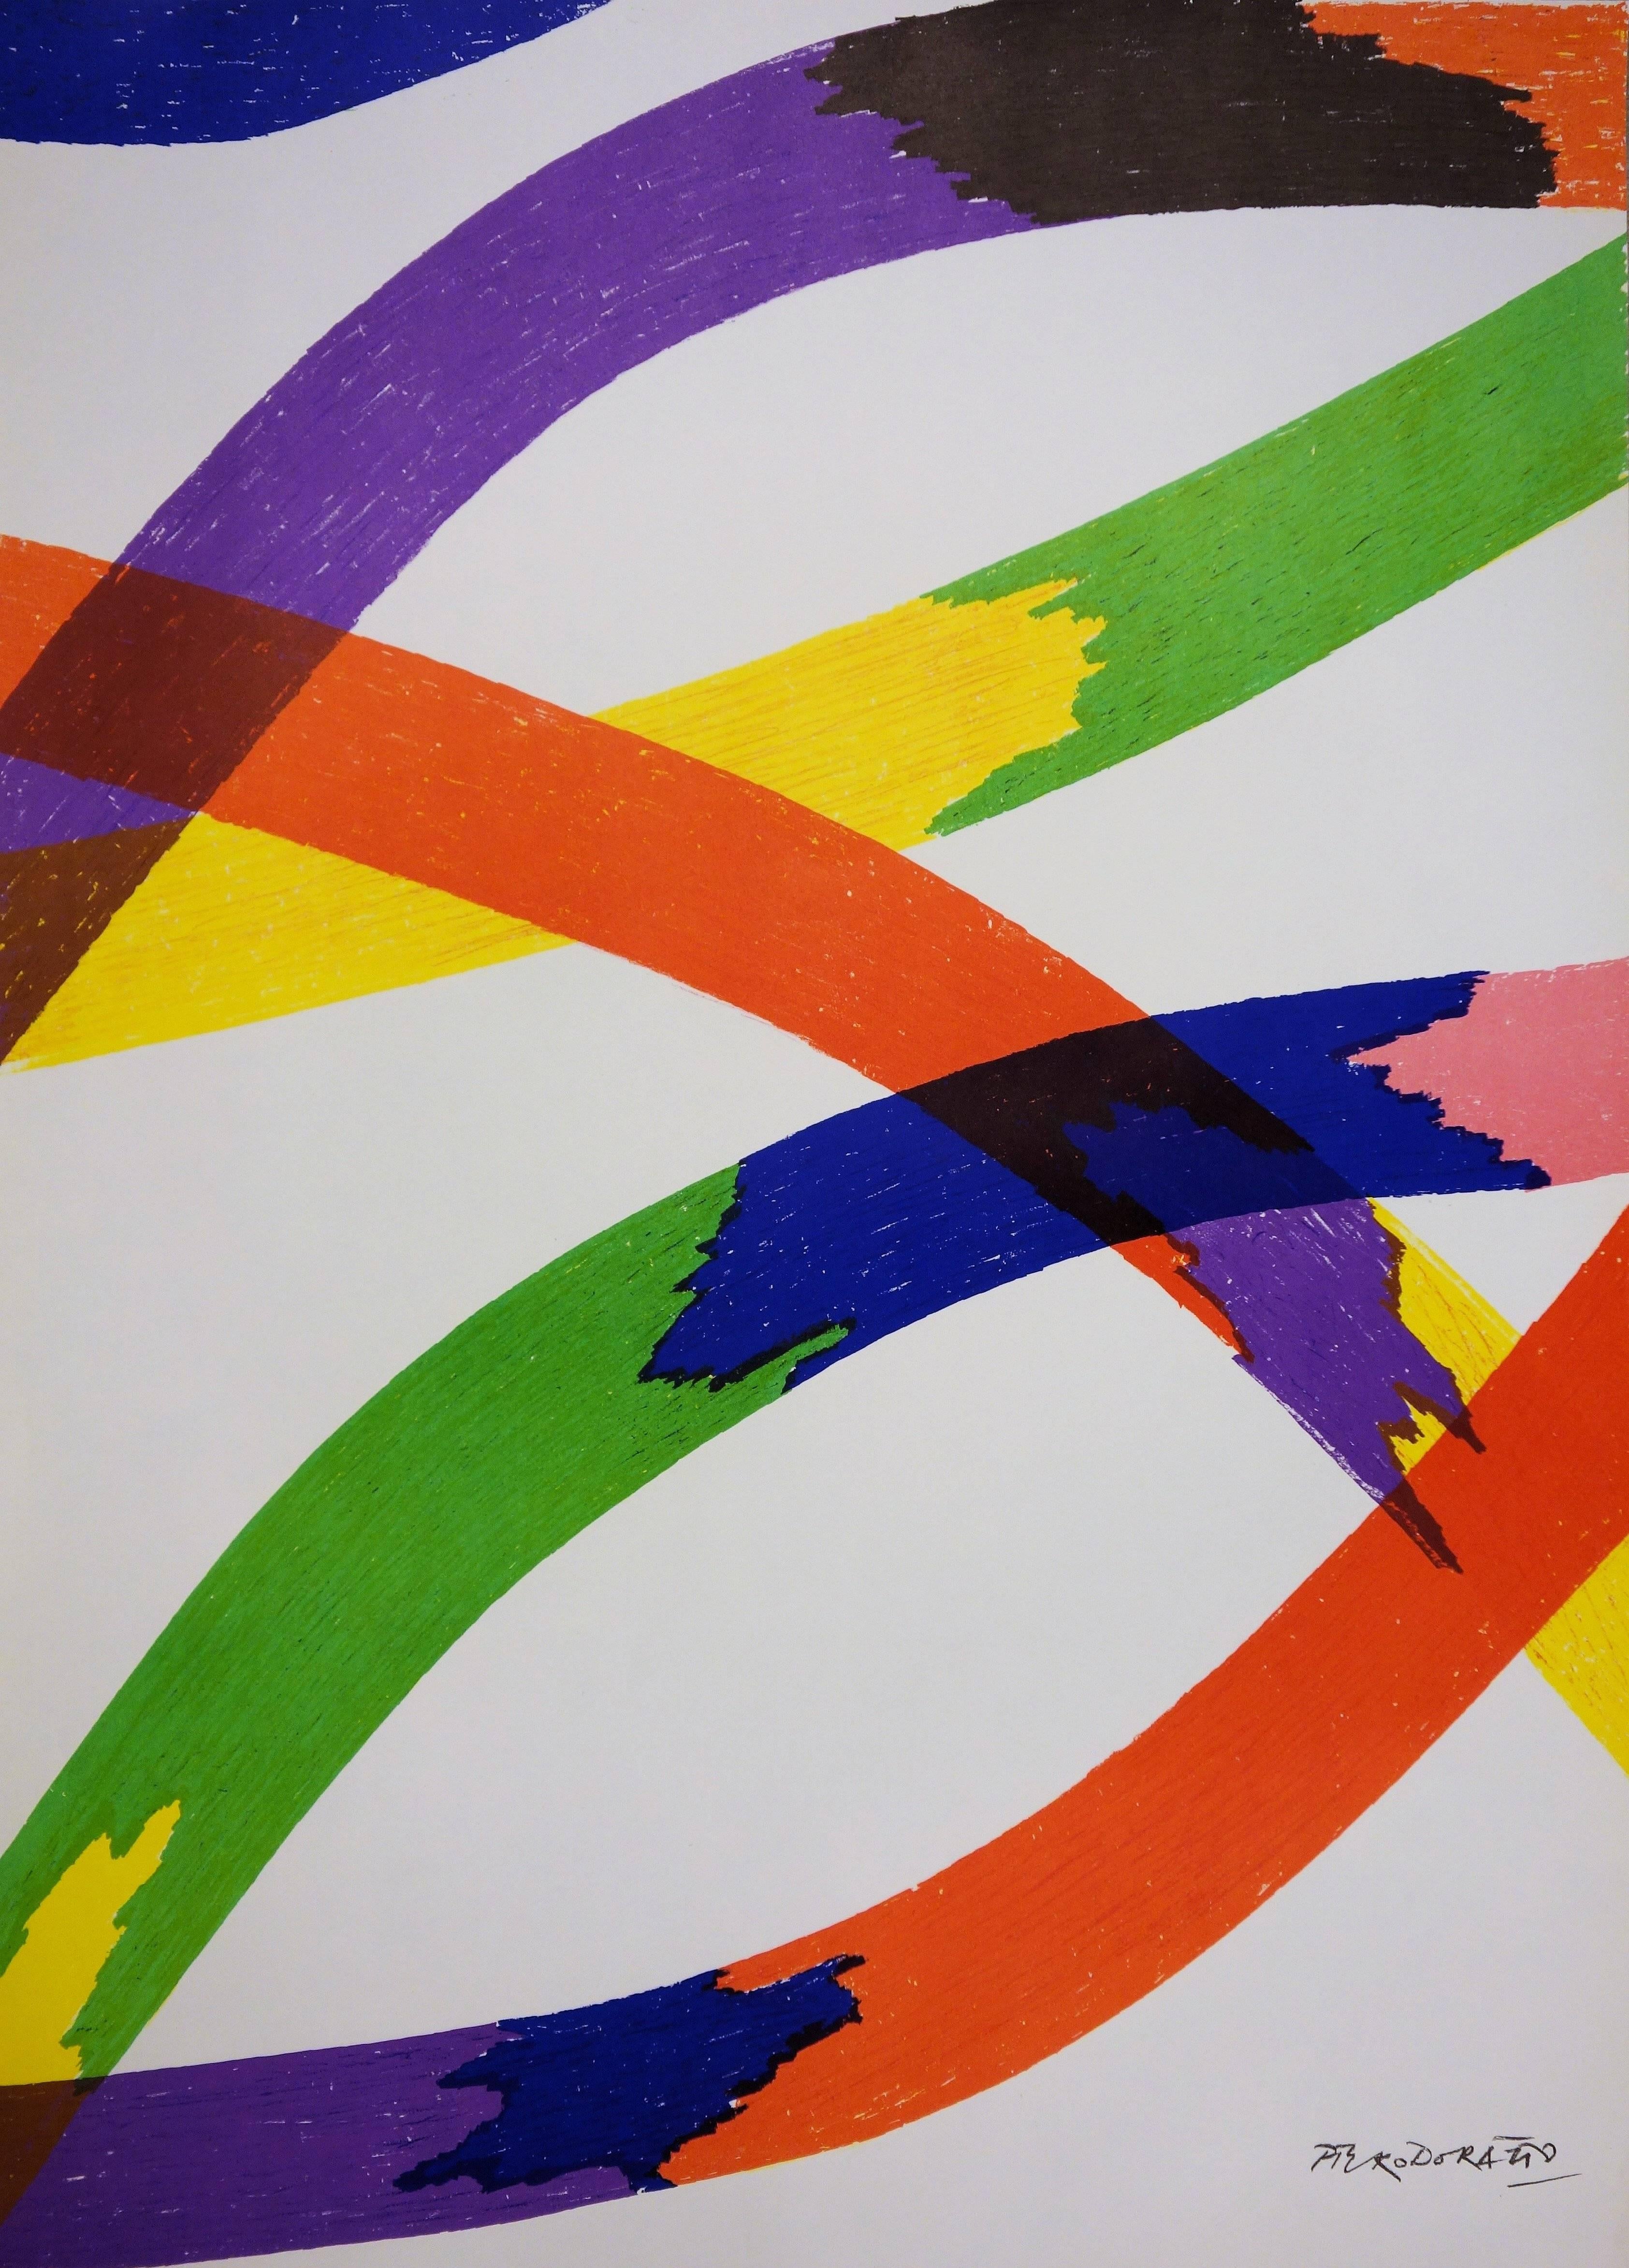 Colored Ribbons - Lithograph (Olympic Games Munich 1972) - Modern Print by Piero Dorazio